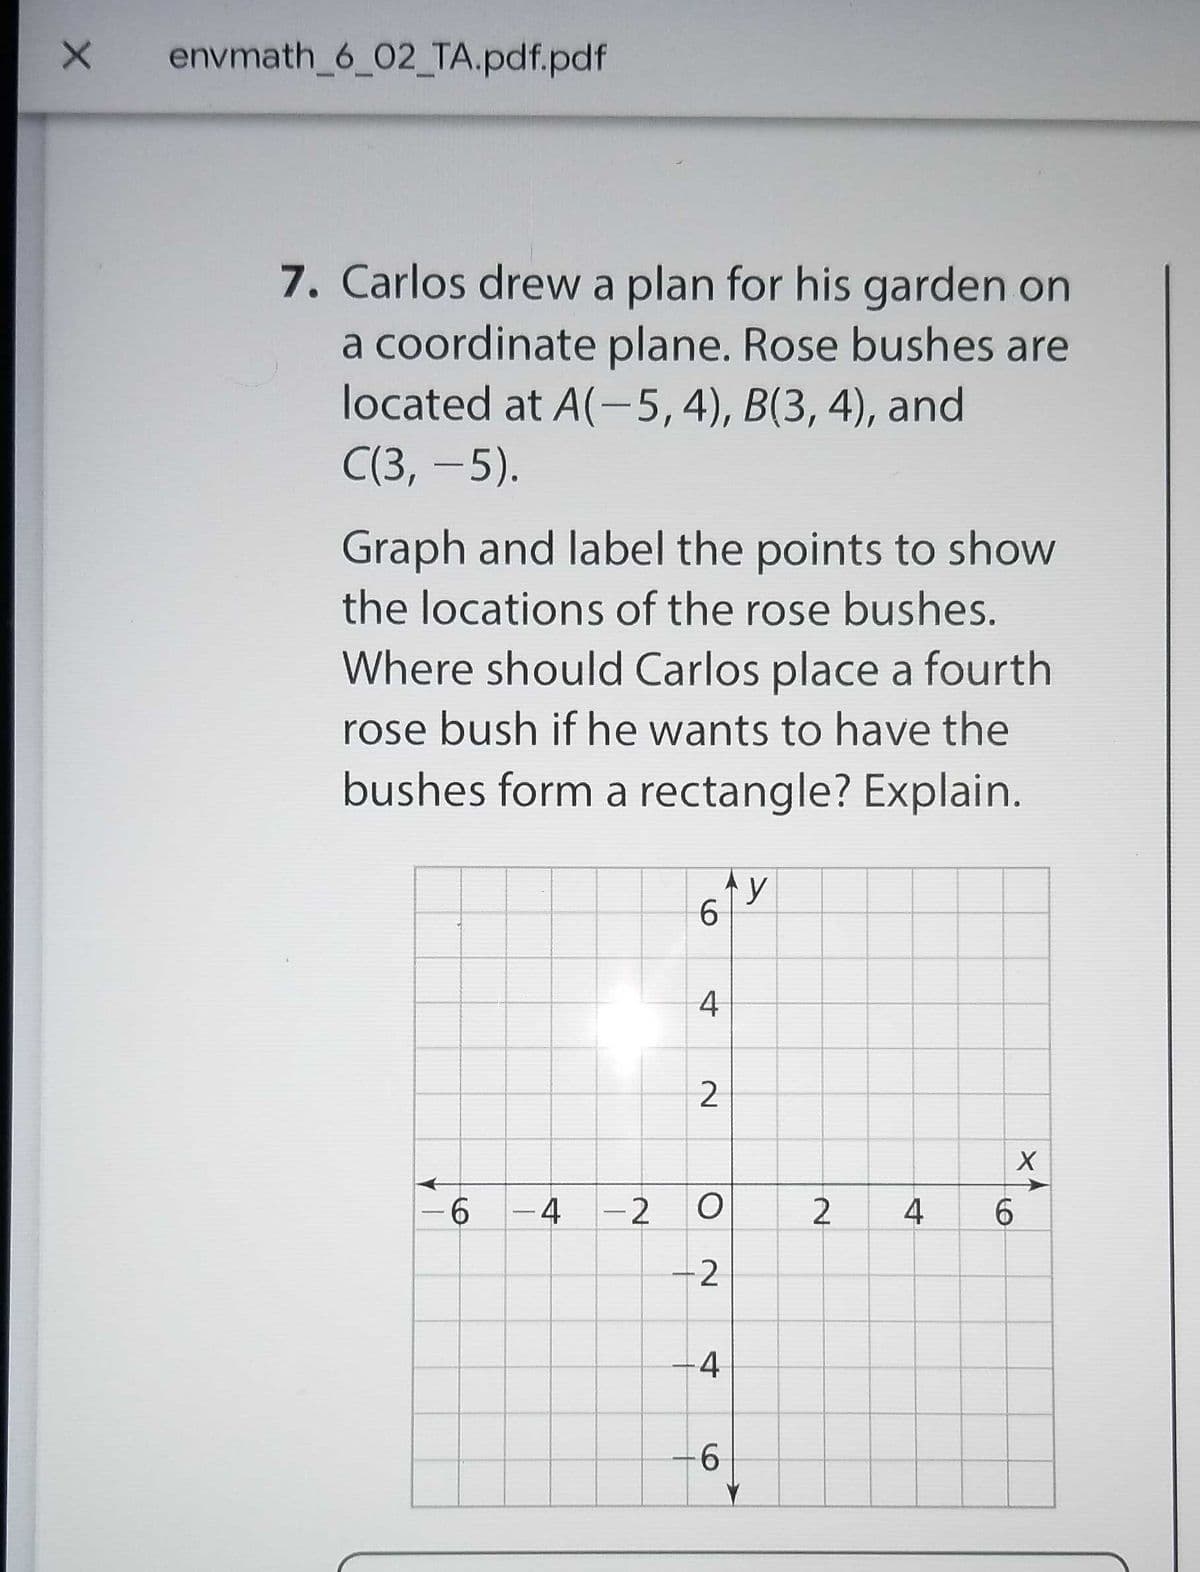 envmath_6_02_TA.pdf.pdf
7. Carlos drew a plan for his garden on
a coordinate plane. Rose bushes are
located at A(-5,4), B(3, 4), and
С(3, -5).
Graph and label the points to show
the locations of the rose bushes.
Where should Carlos place a fourth
rose bush if he wants to have the
bushes form a rectangle? Explain.
y
6.
4
-6
-4 -2
2
4
6.
-2
4
